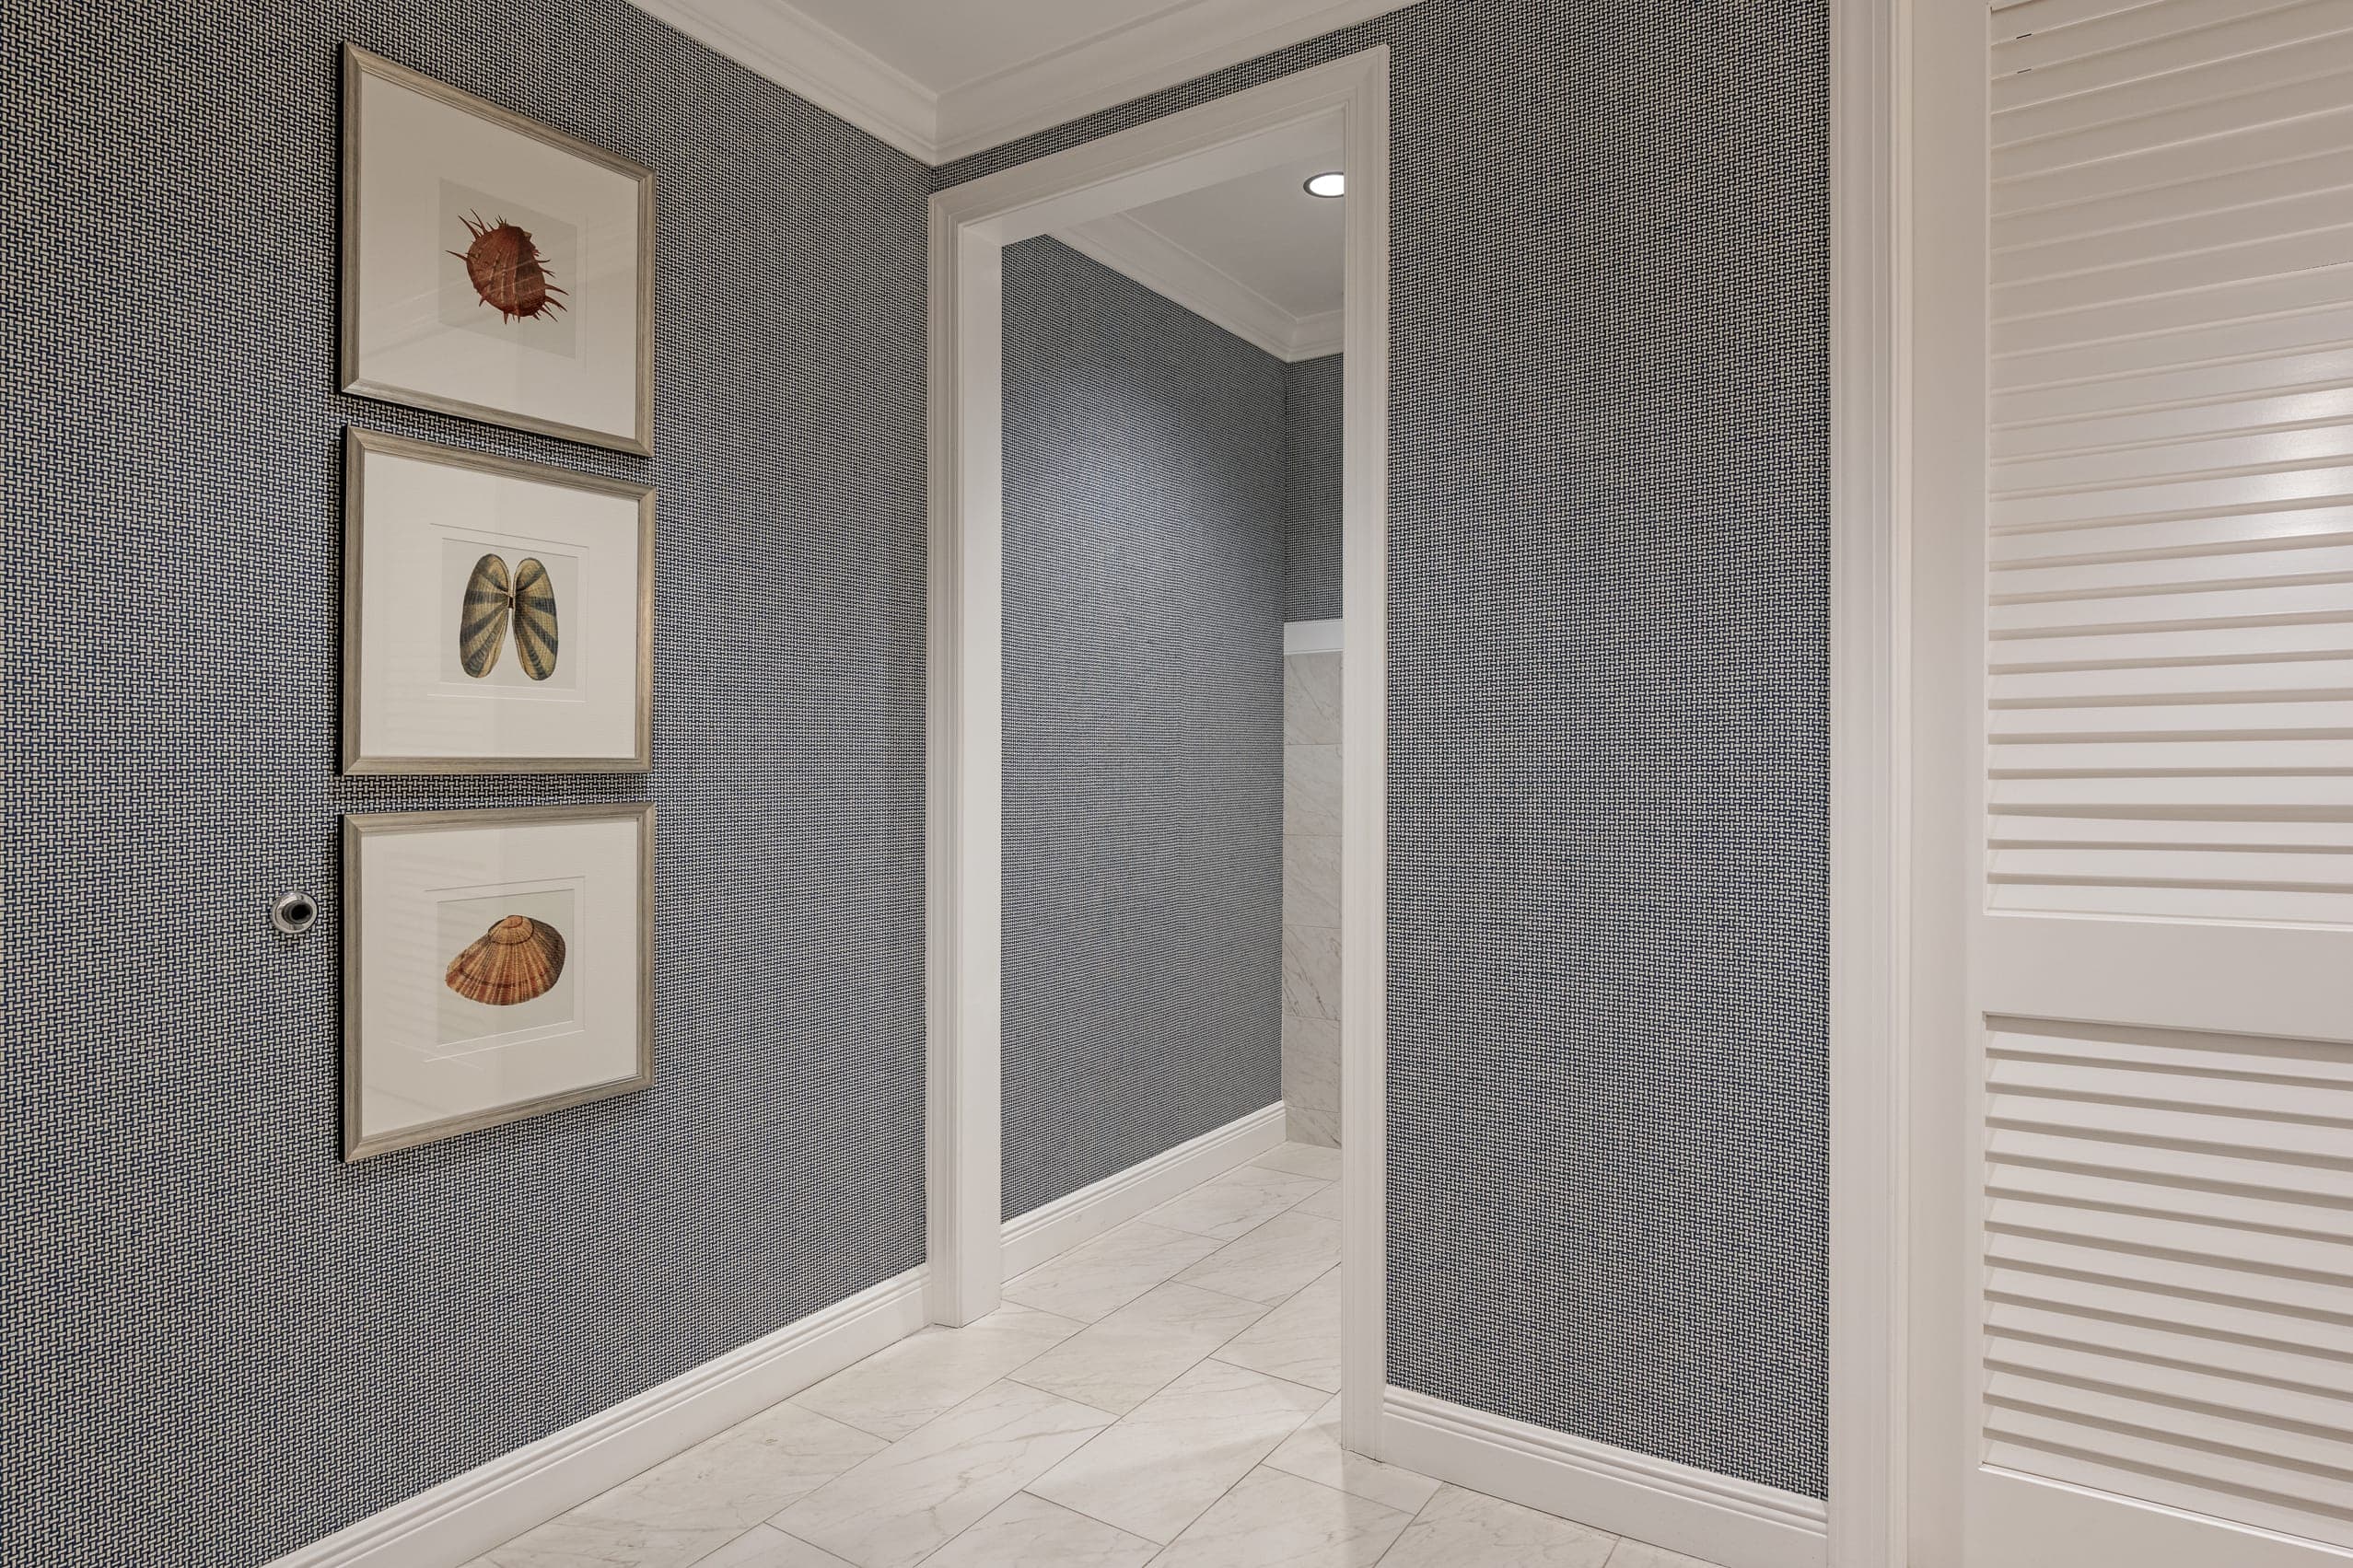 Sea Shells And Red Sea Erchin Paintings On Blue Texture Cross Hatch Wall With White Trim